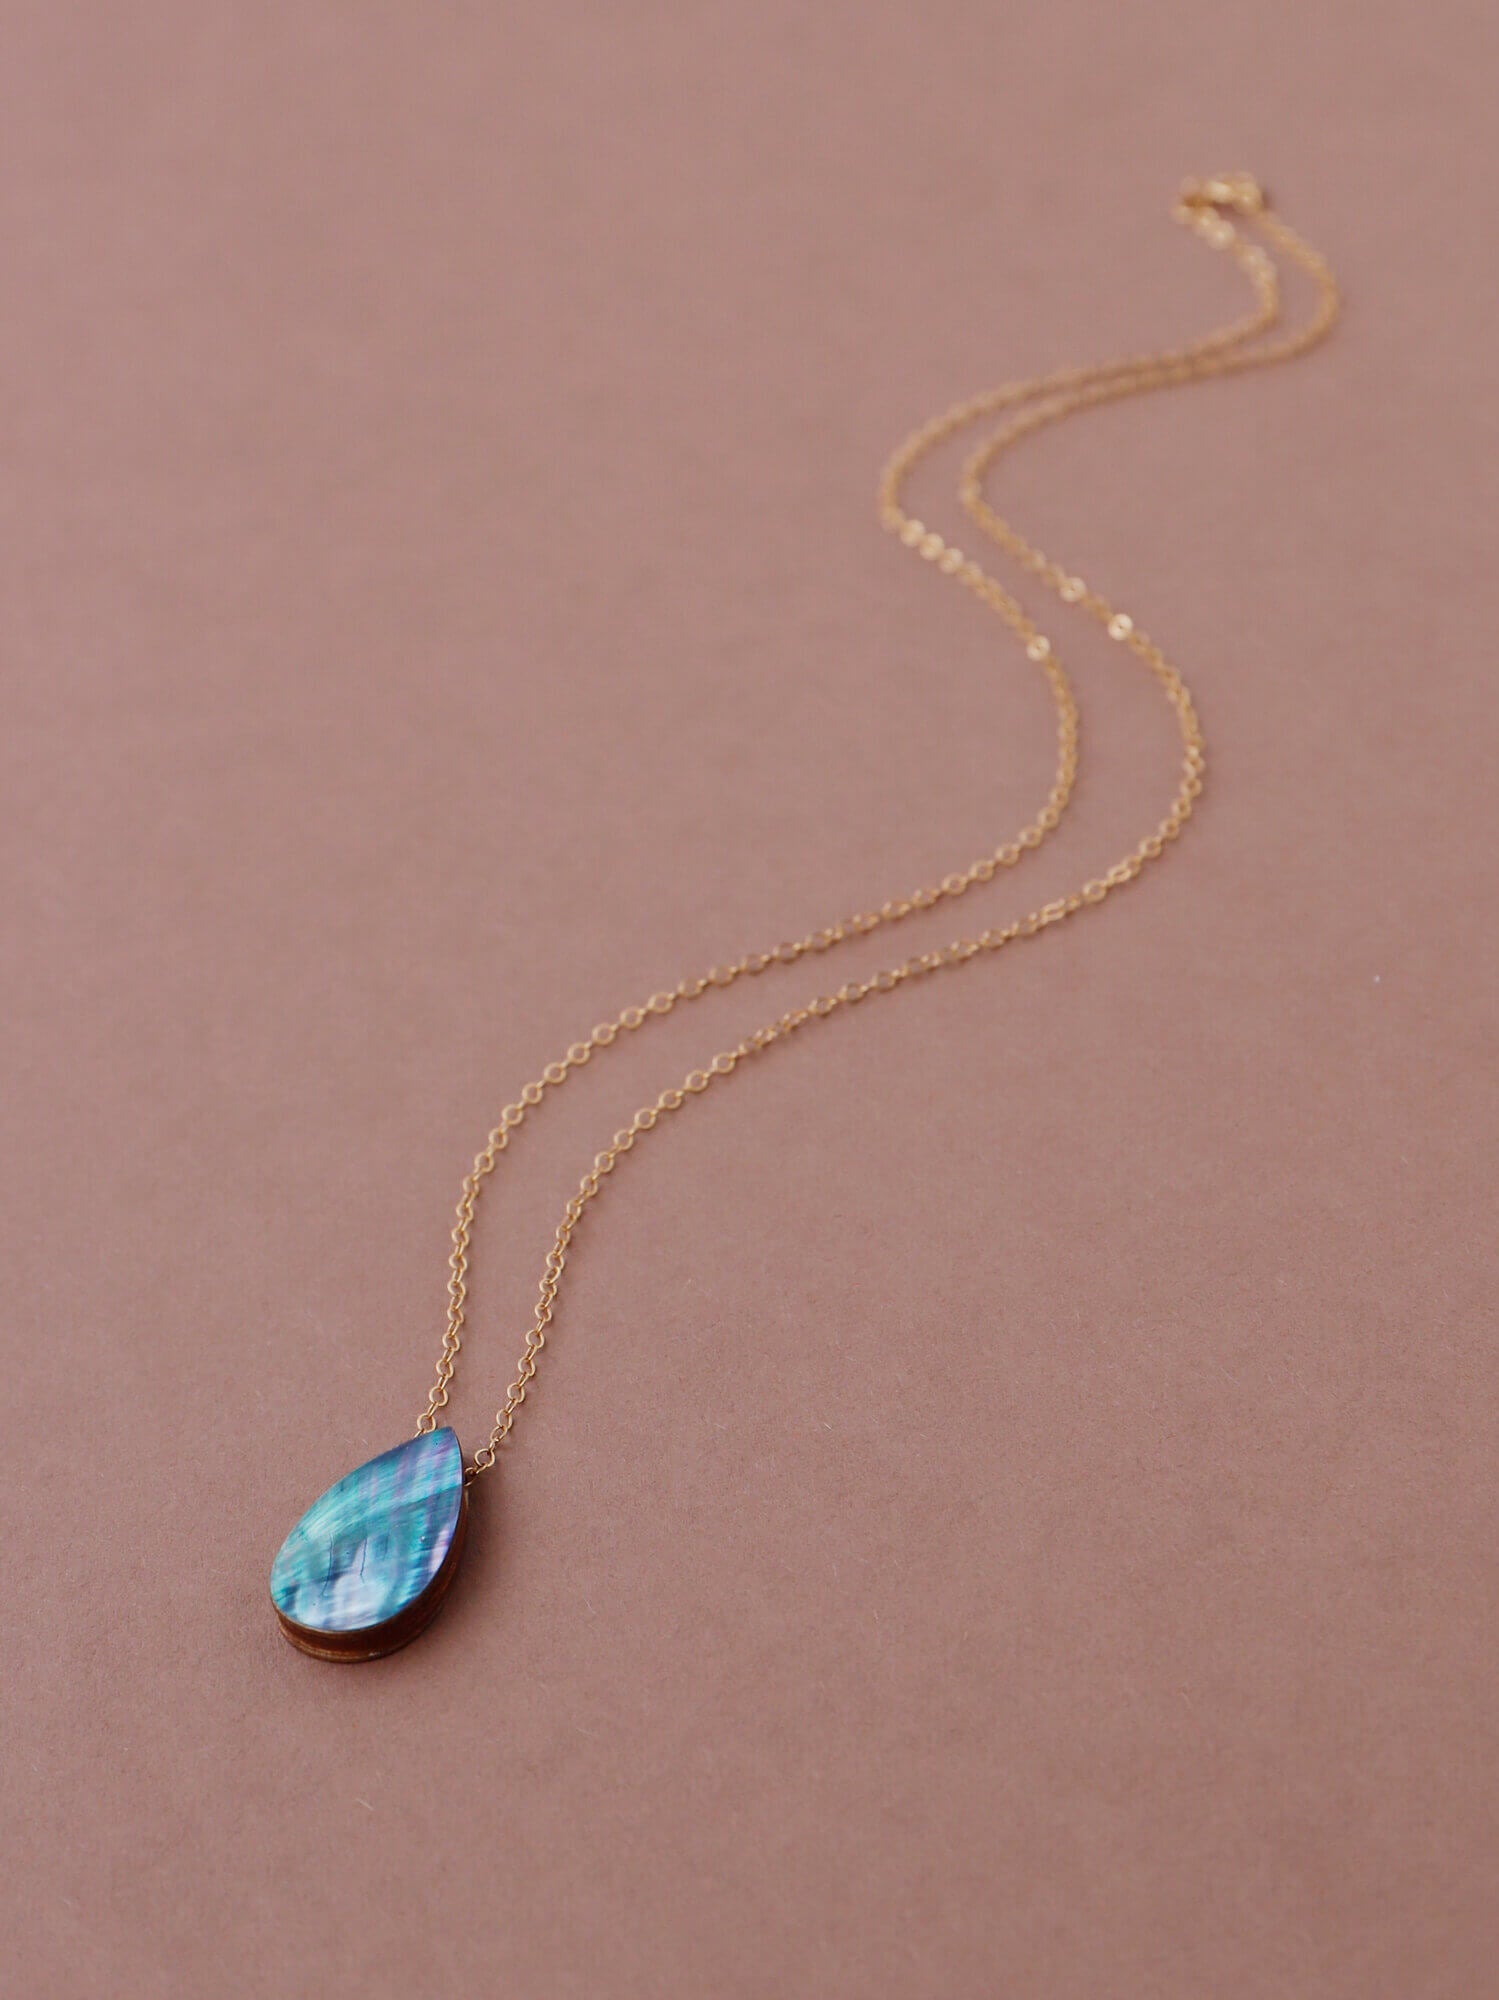 Raindrop Necklace | Sea Blue Shell | by Wolf & Moon - Lifestory